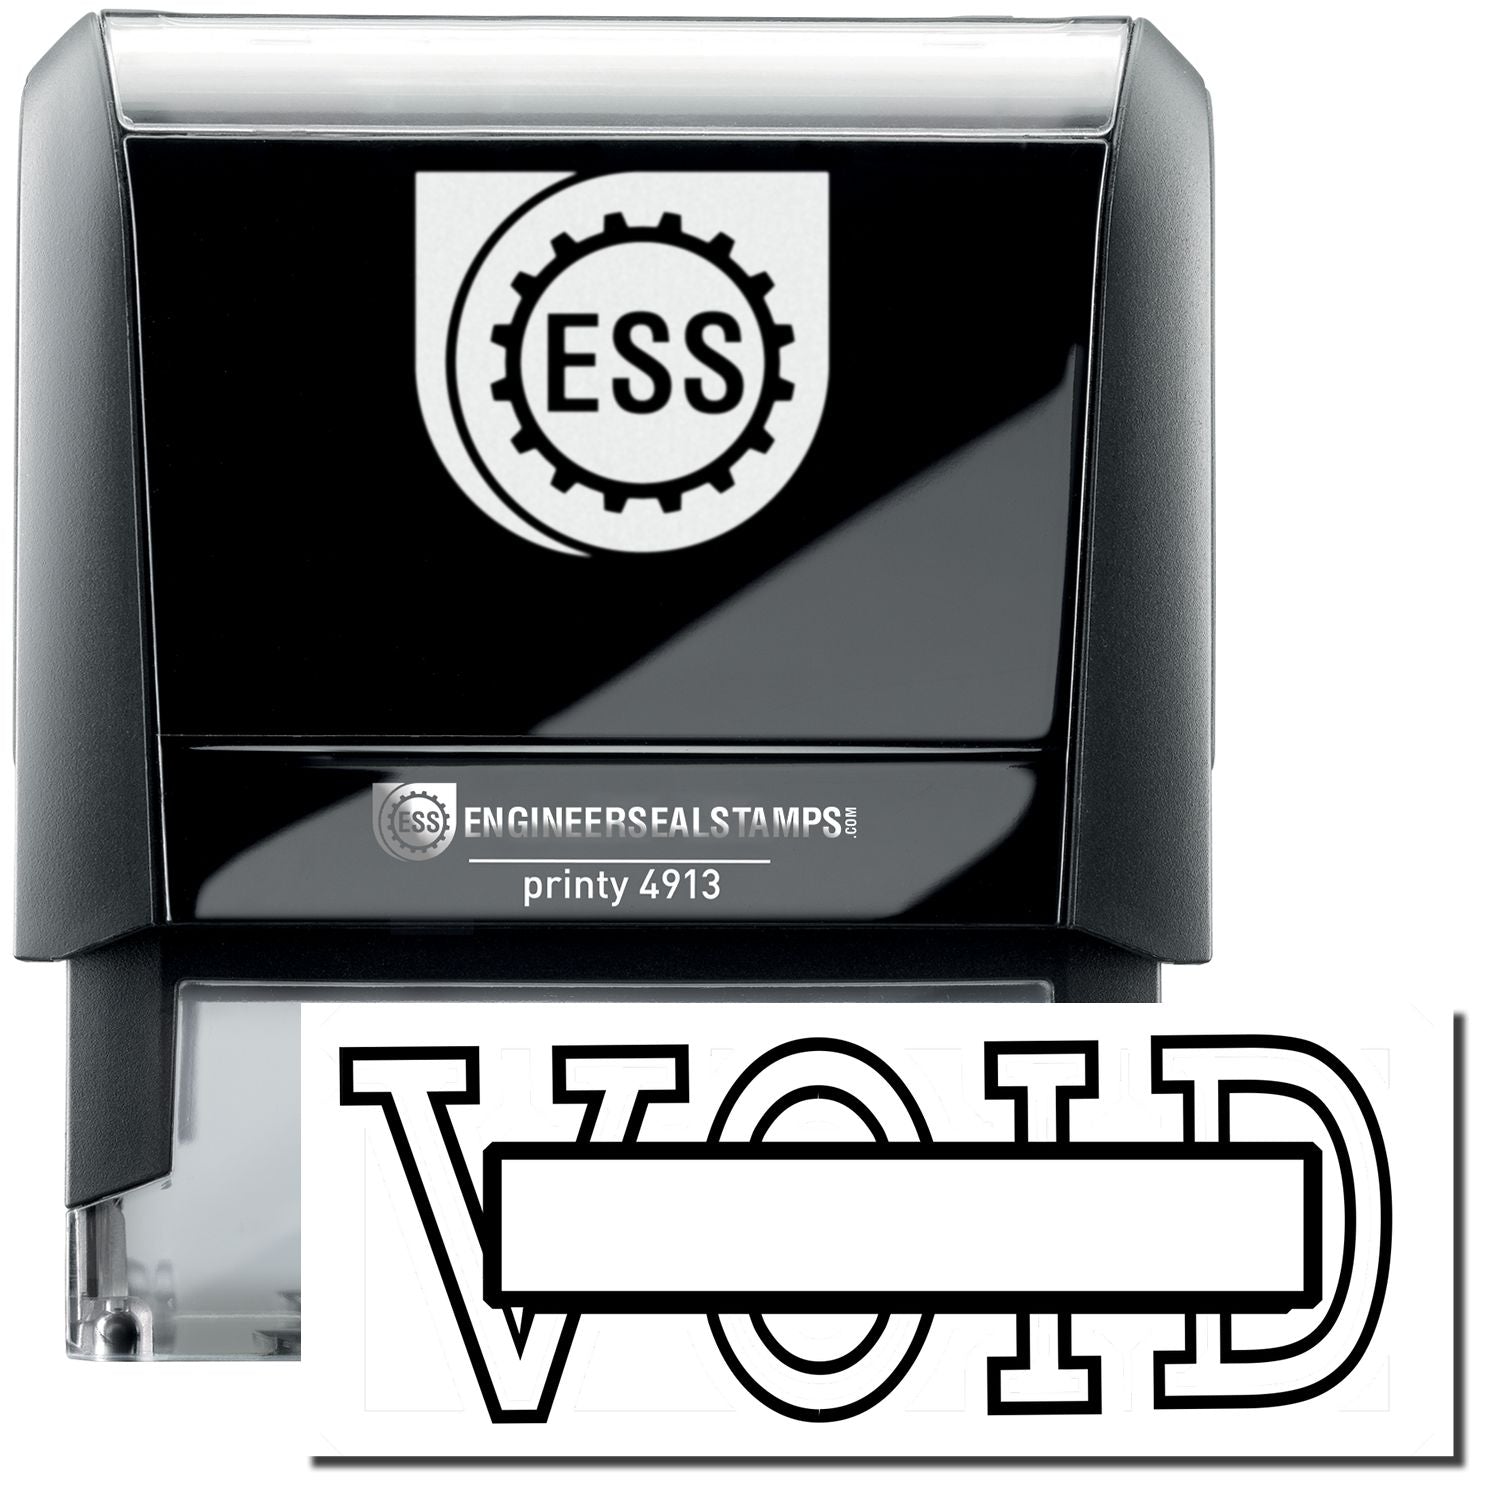 A self-inking stamp with a stamped image showing how the text "VOID" in a large outline style with a box on it is displayed after stamping.